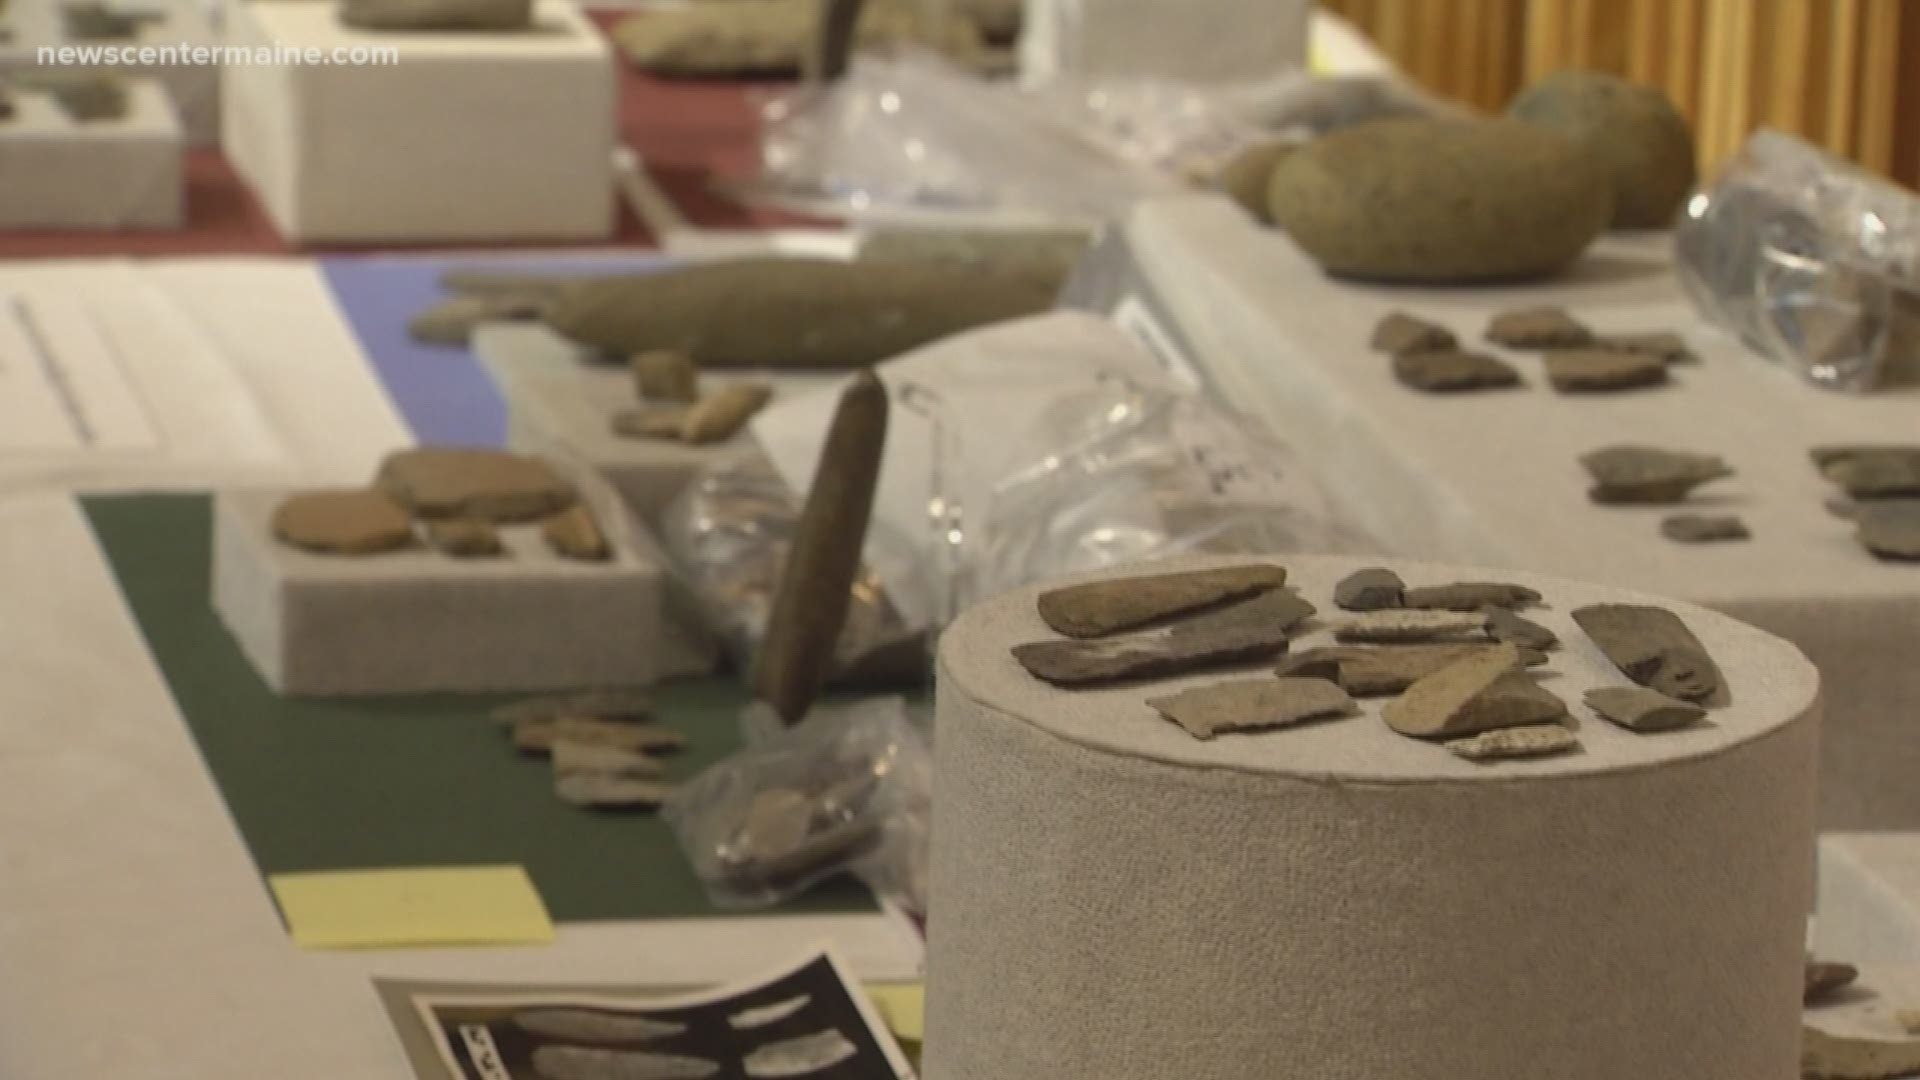 A man's massive, private collection of artifacts is being returned to Penobscot Nation.